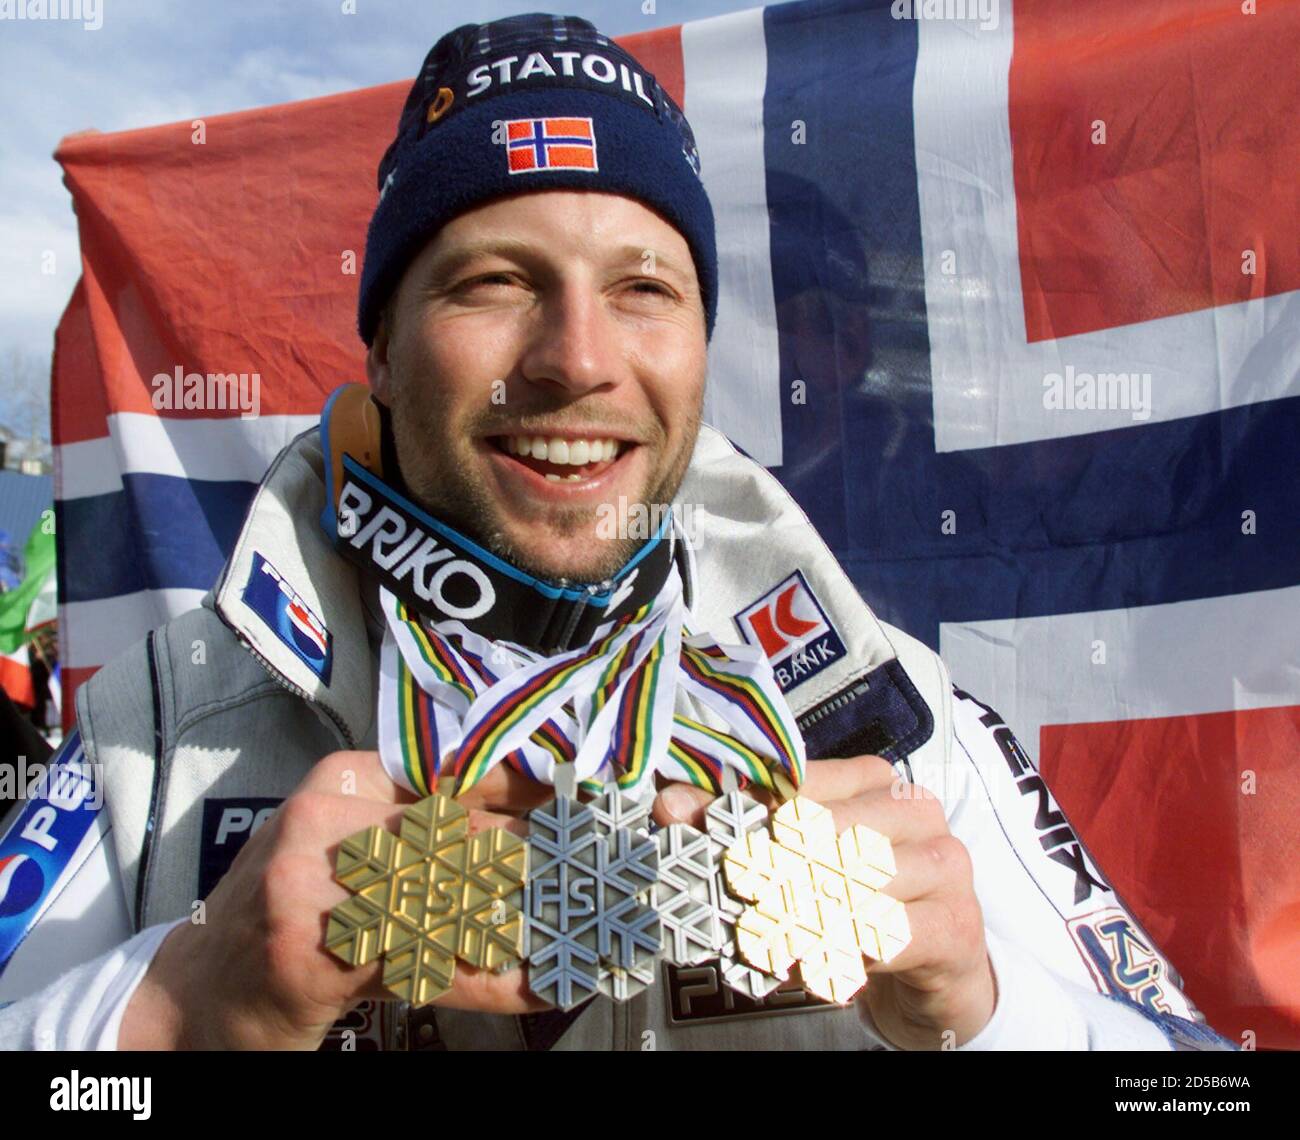 Norway's Lasse Kjus holds up the five medals he won following the men's  slalom race at the World Alpine Skiing Championships February 14. Kjus won  a silver medal in the race, making